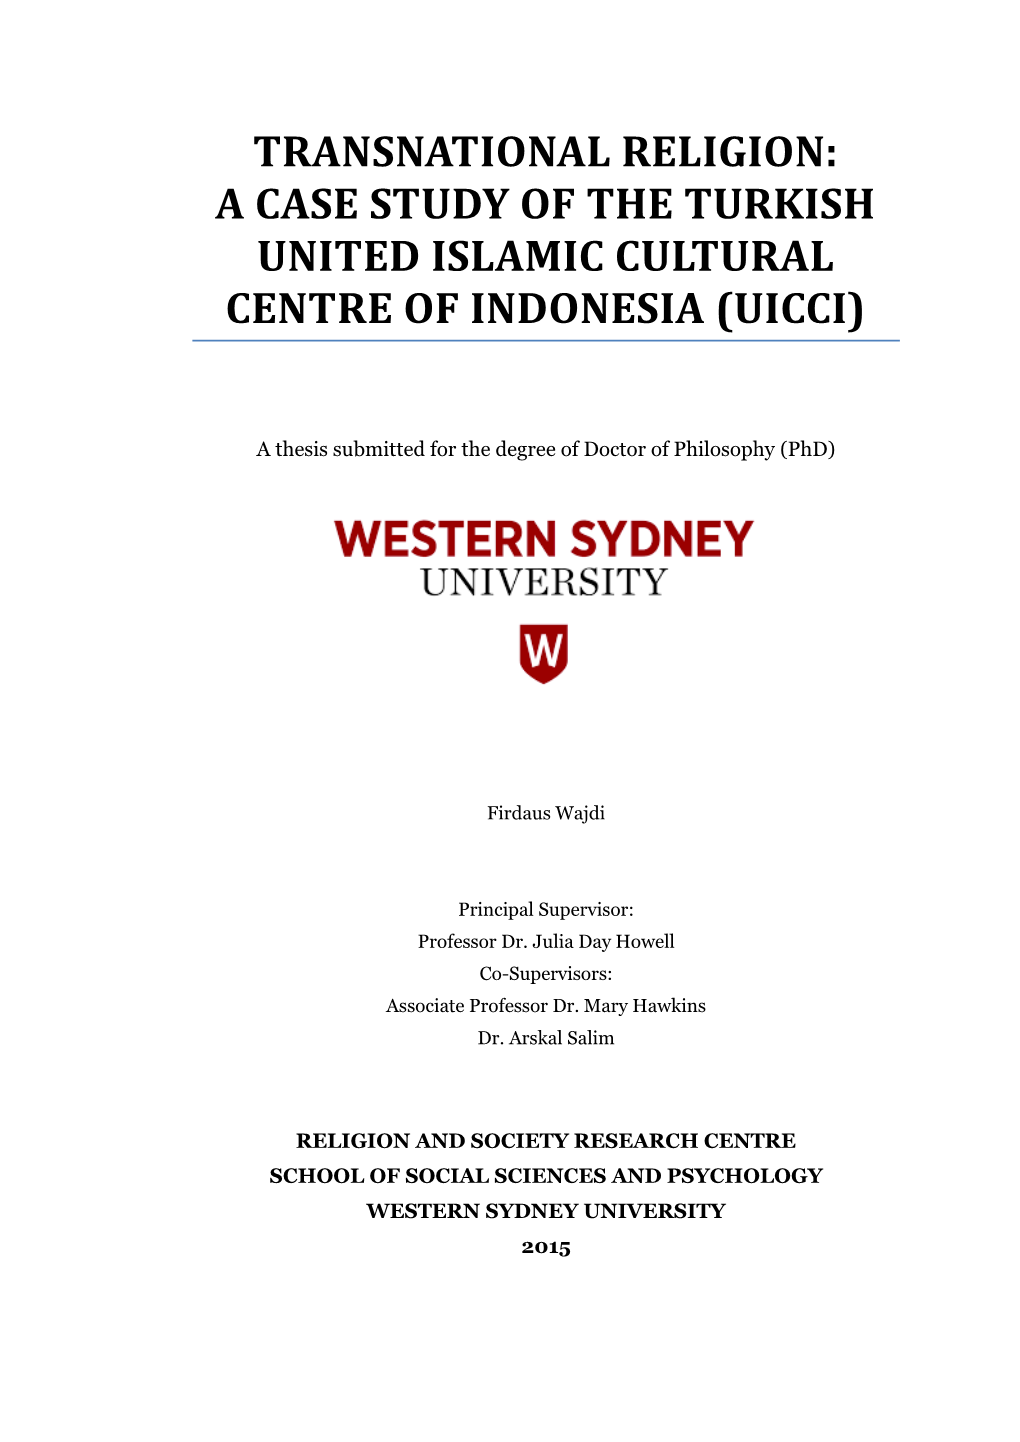 Transnational Religion: a Case Study of the Turkish United Islamic Cultural Centre of Indonesia (Uicci)